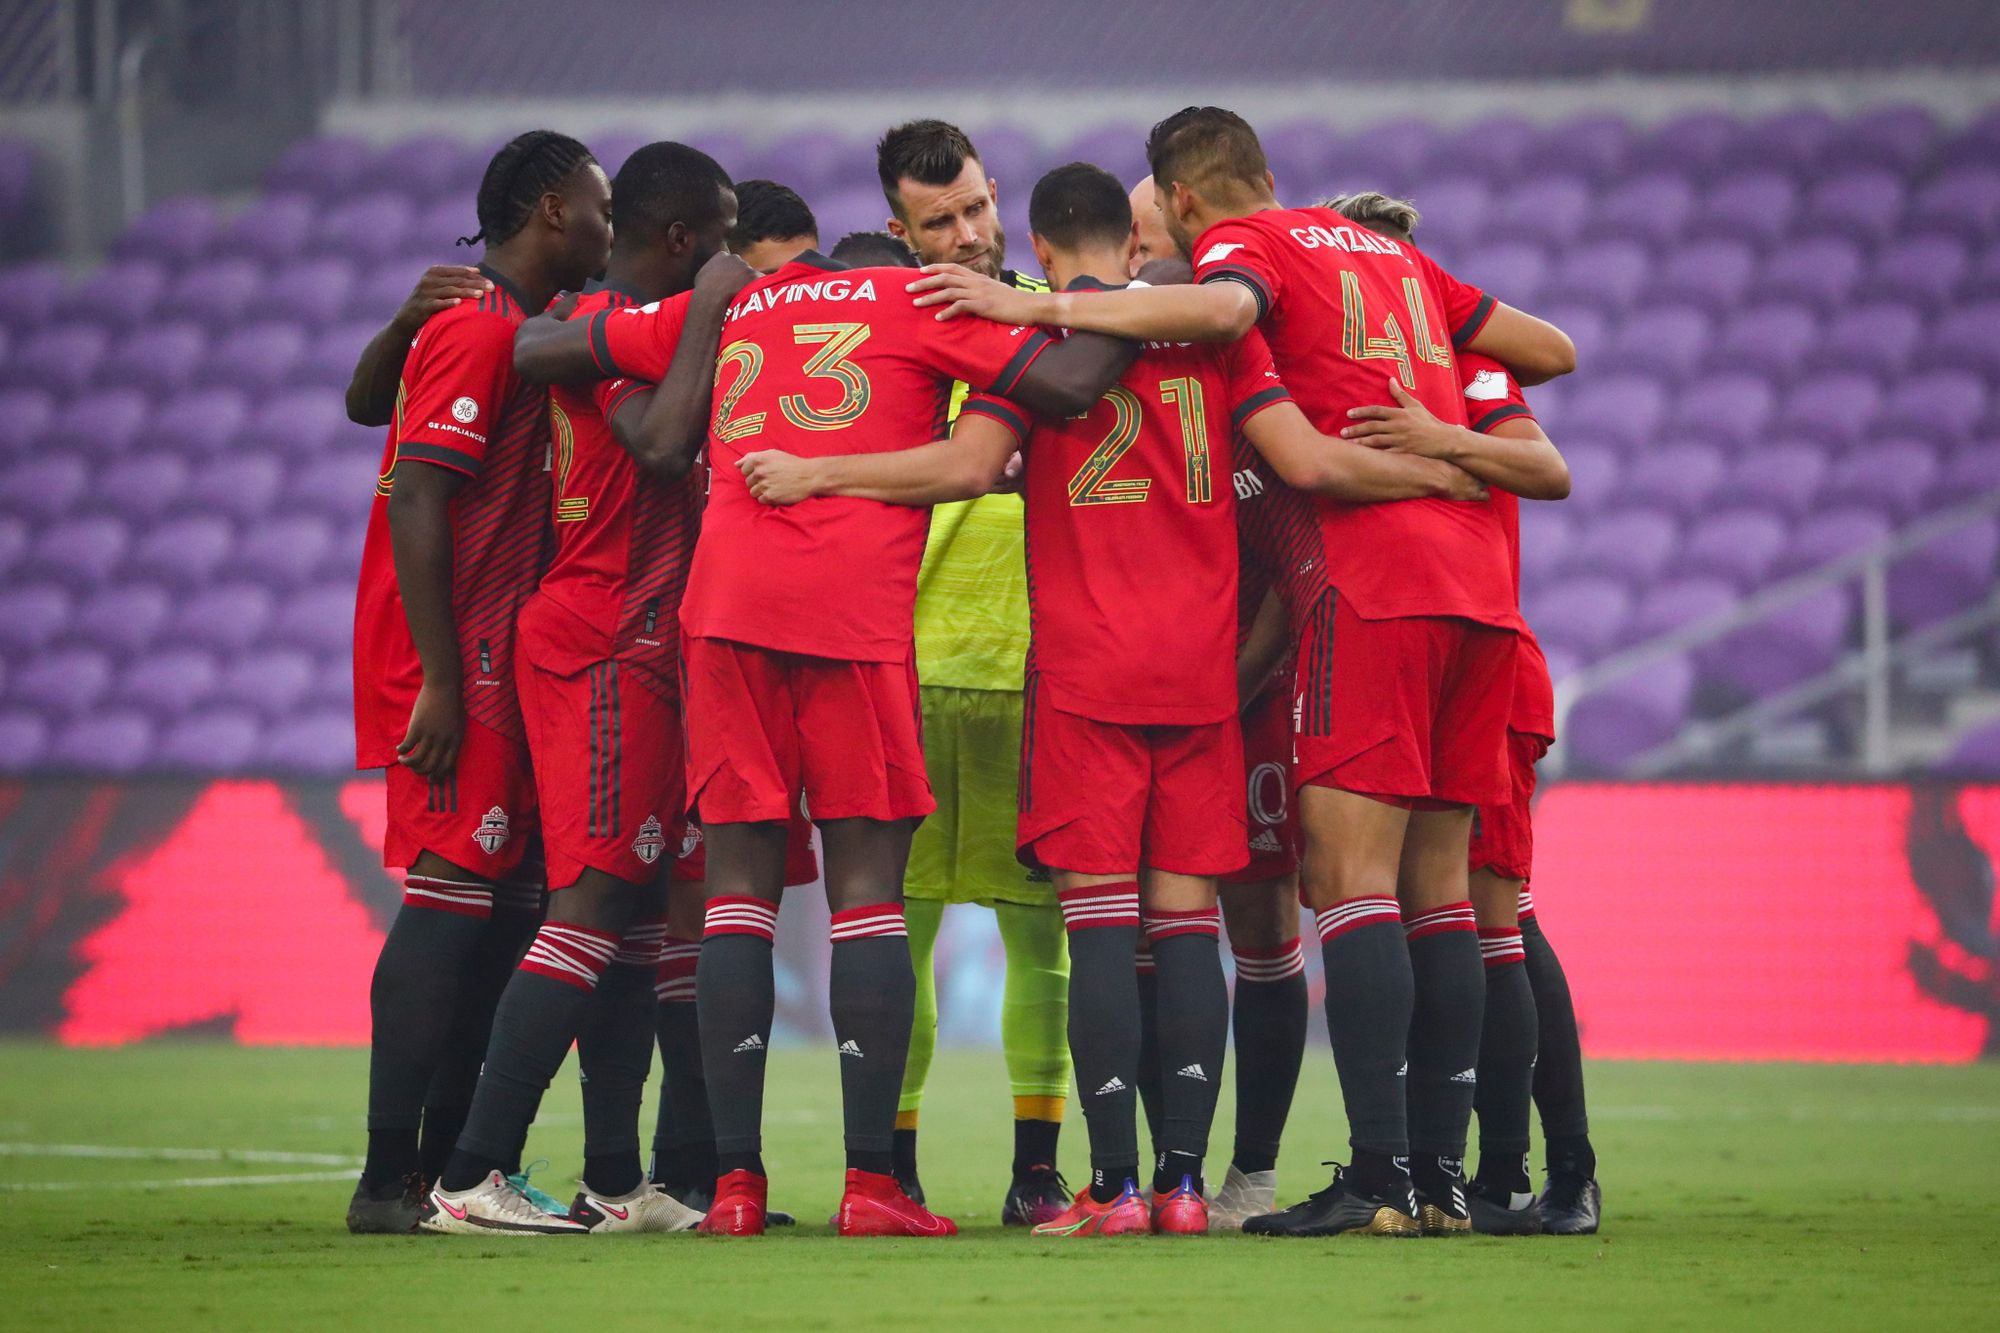 Late goal sinks Toronto FC in loss to Orlando City